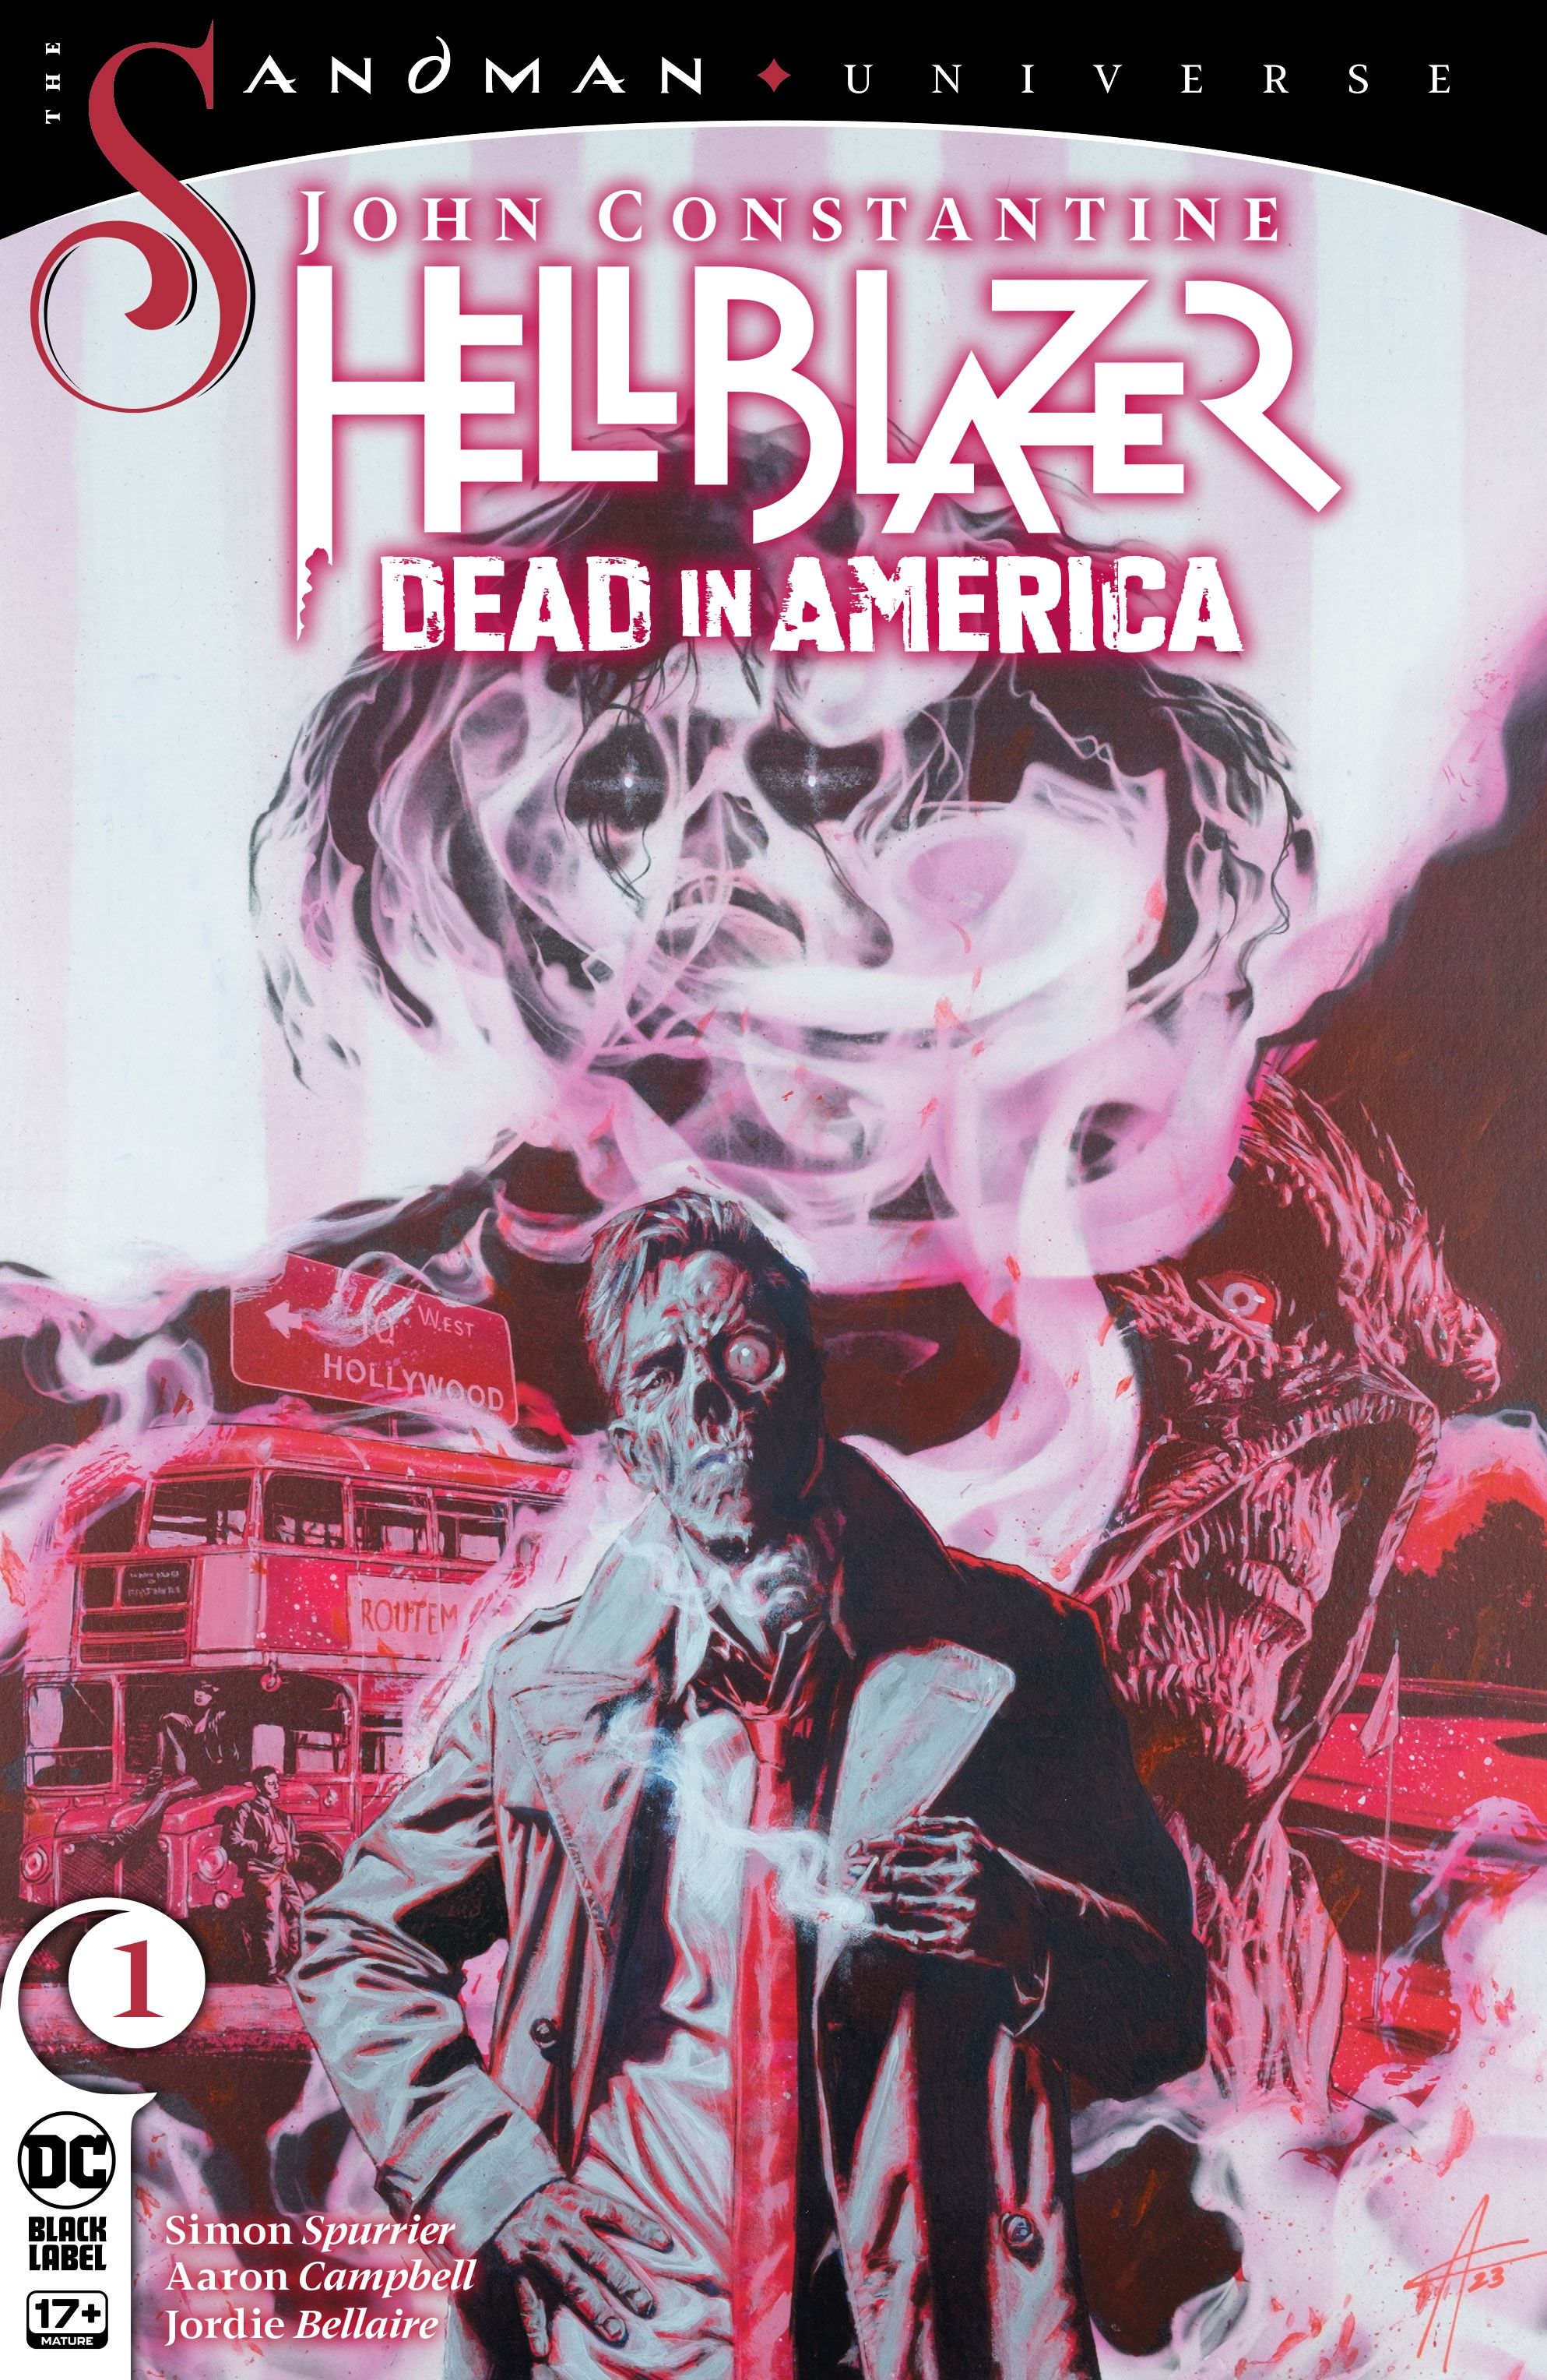 Hellblazer: Dead in America #1 cover, John Constantine standing in front of a diner, with half his face a skeleton.